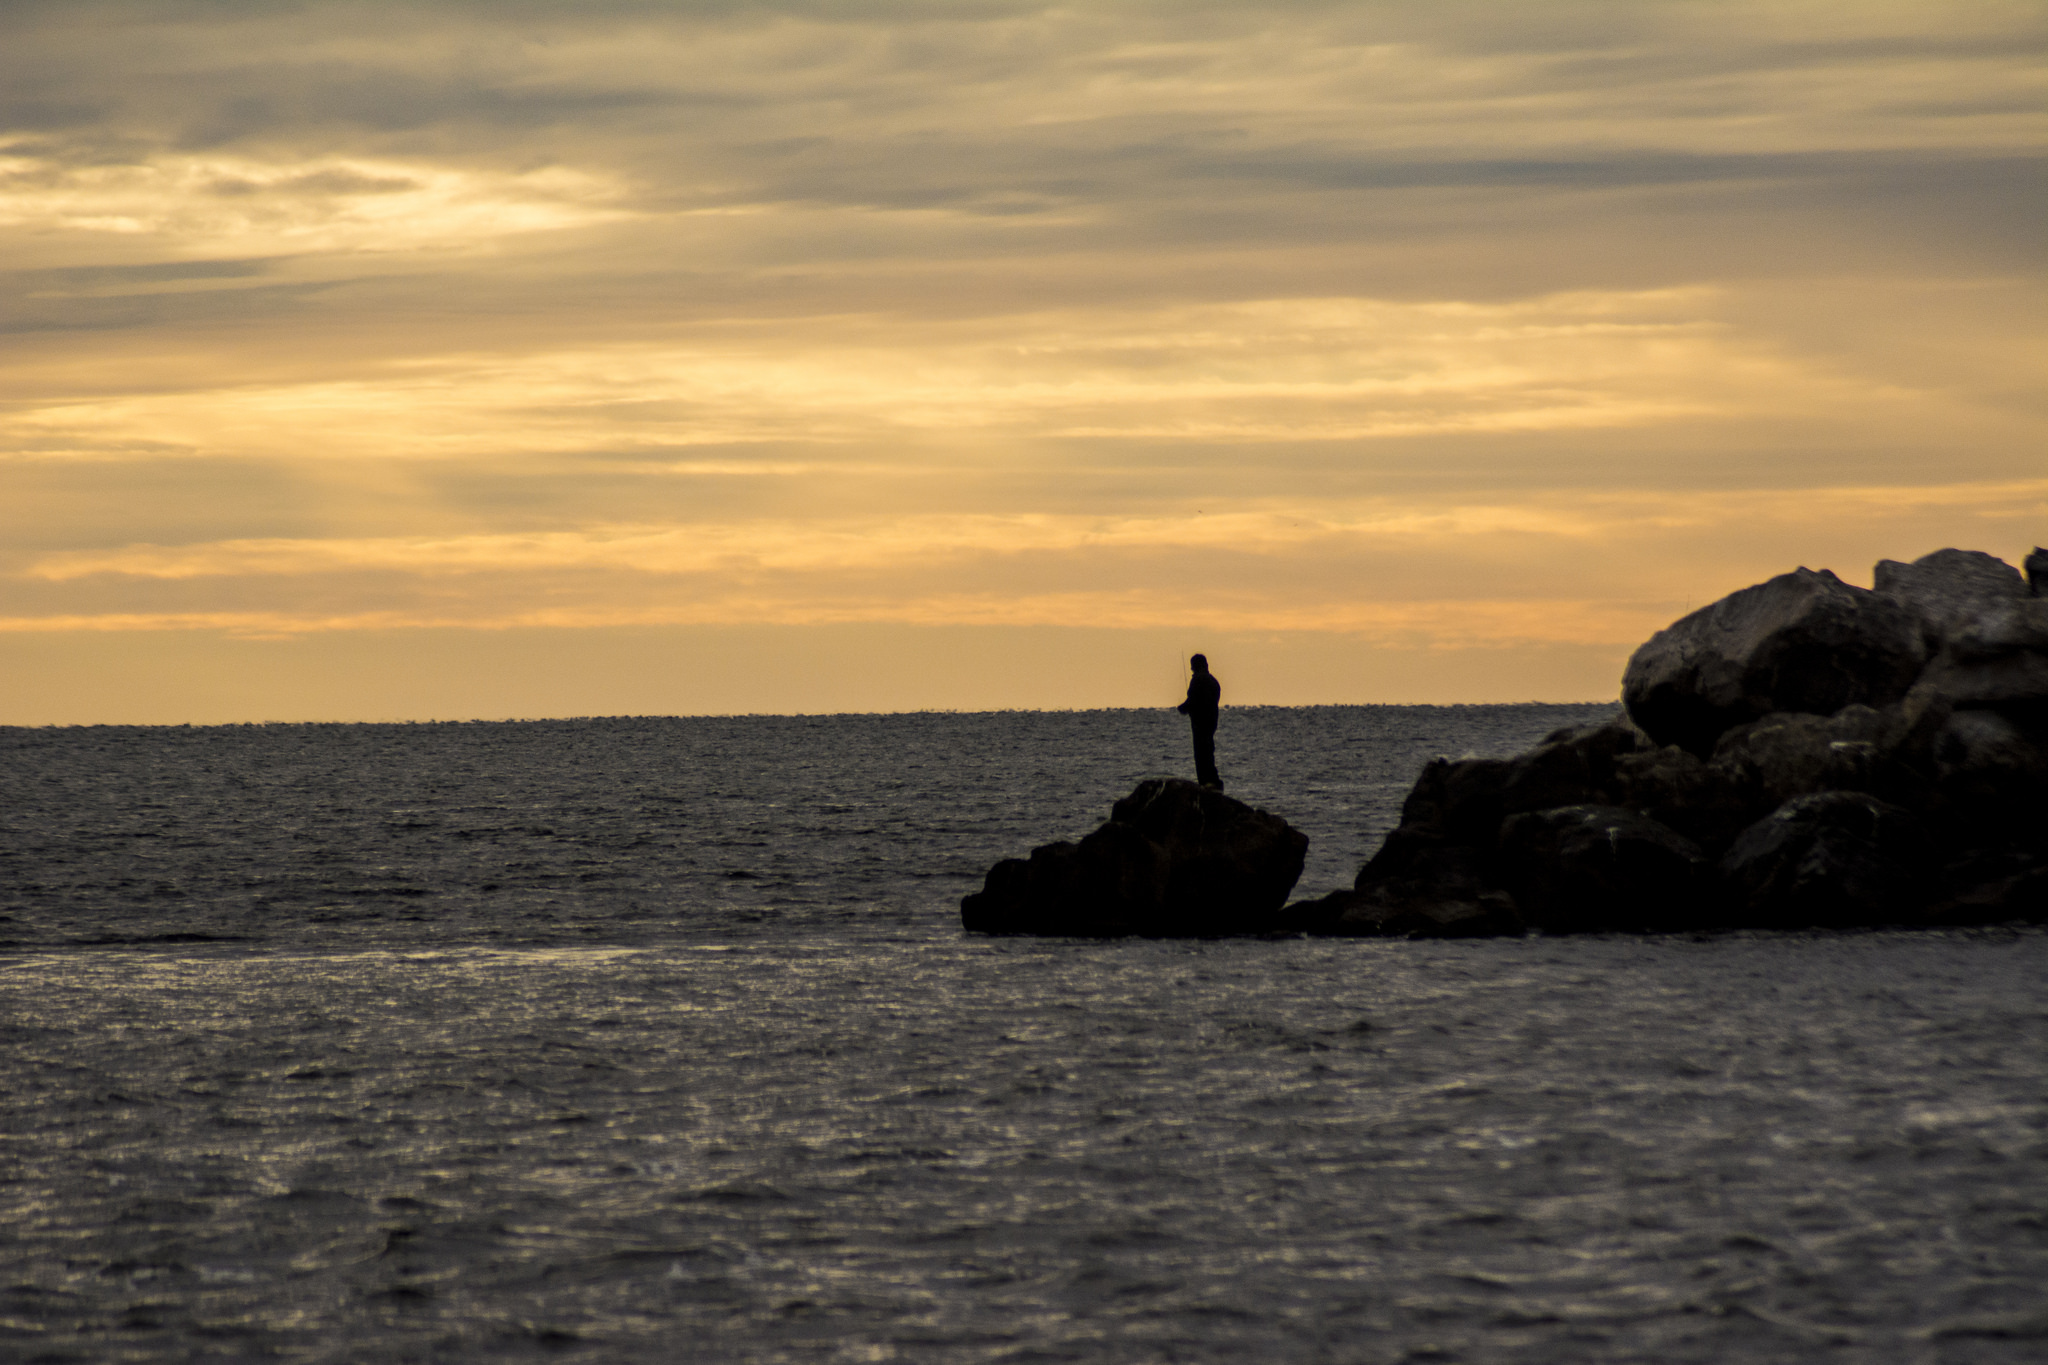 A person standing on a rock in the middle of the ocean